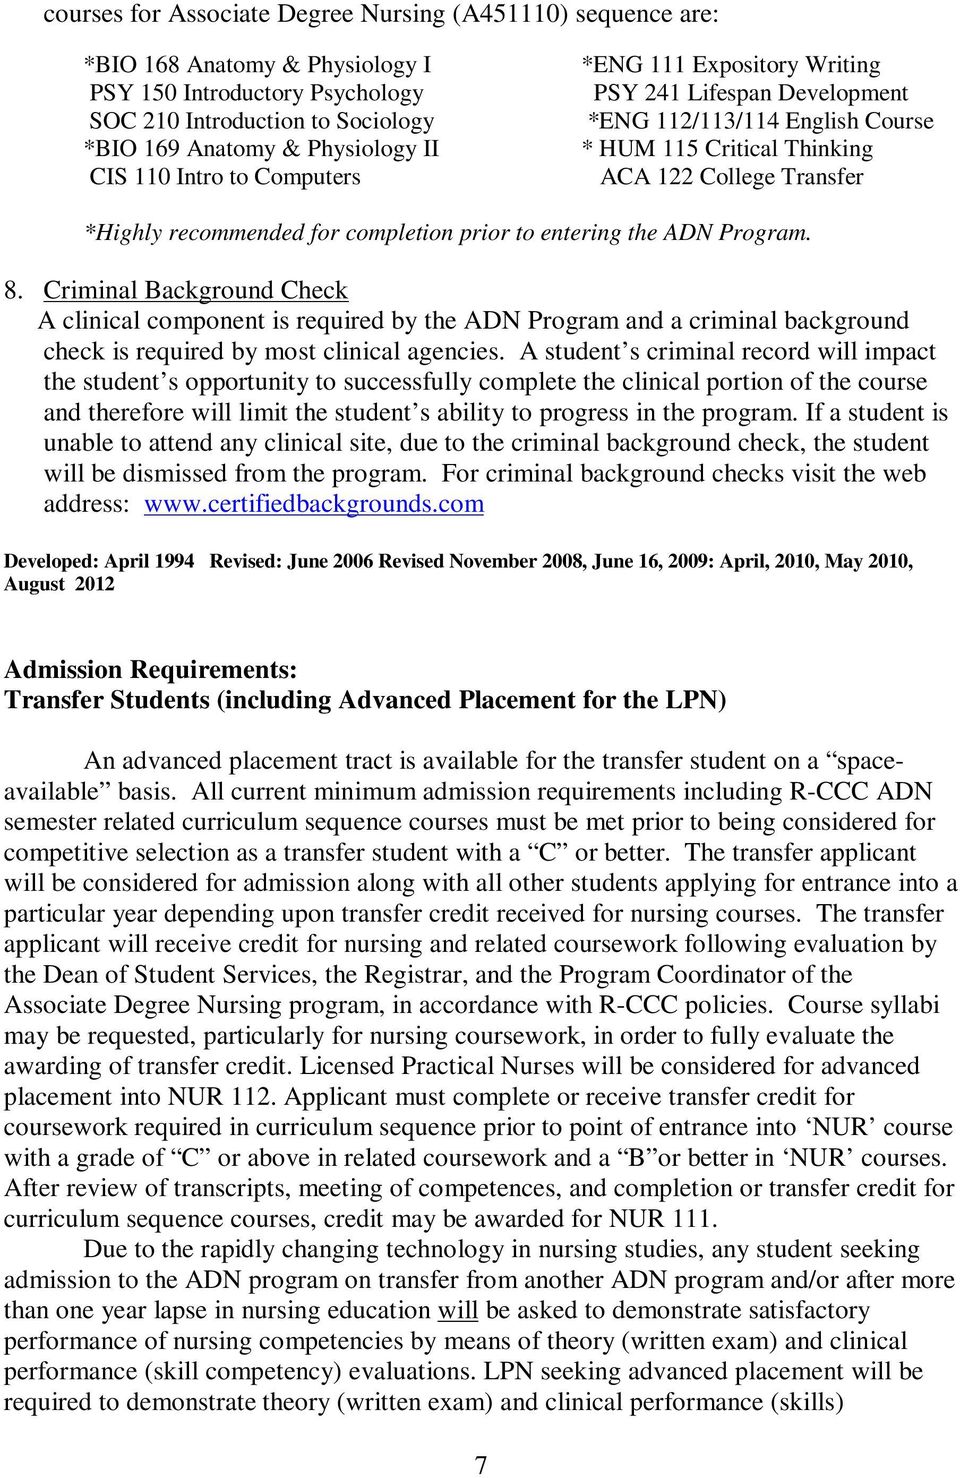 prior to entering the ADN Program. 8. Criminal Background Check A clinical component is required by the ADN Program and a criminal background check is required by most clinical agencies.